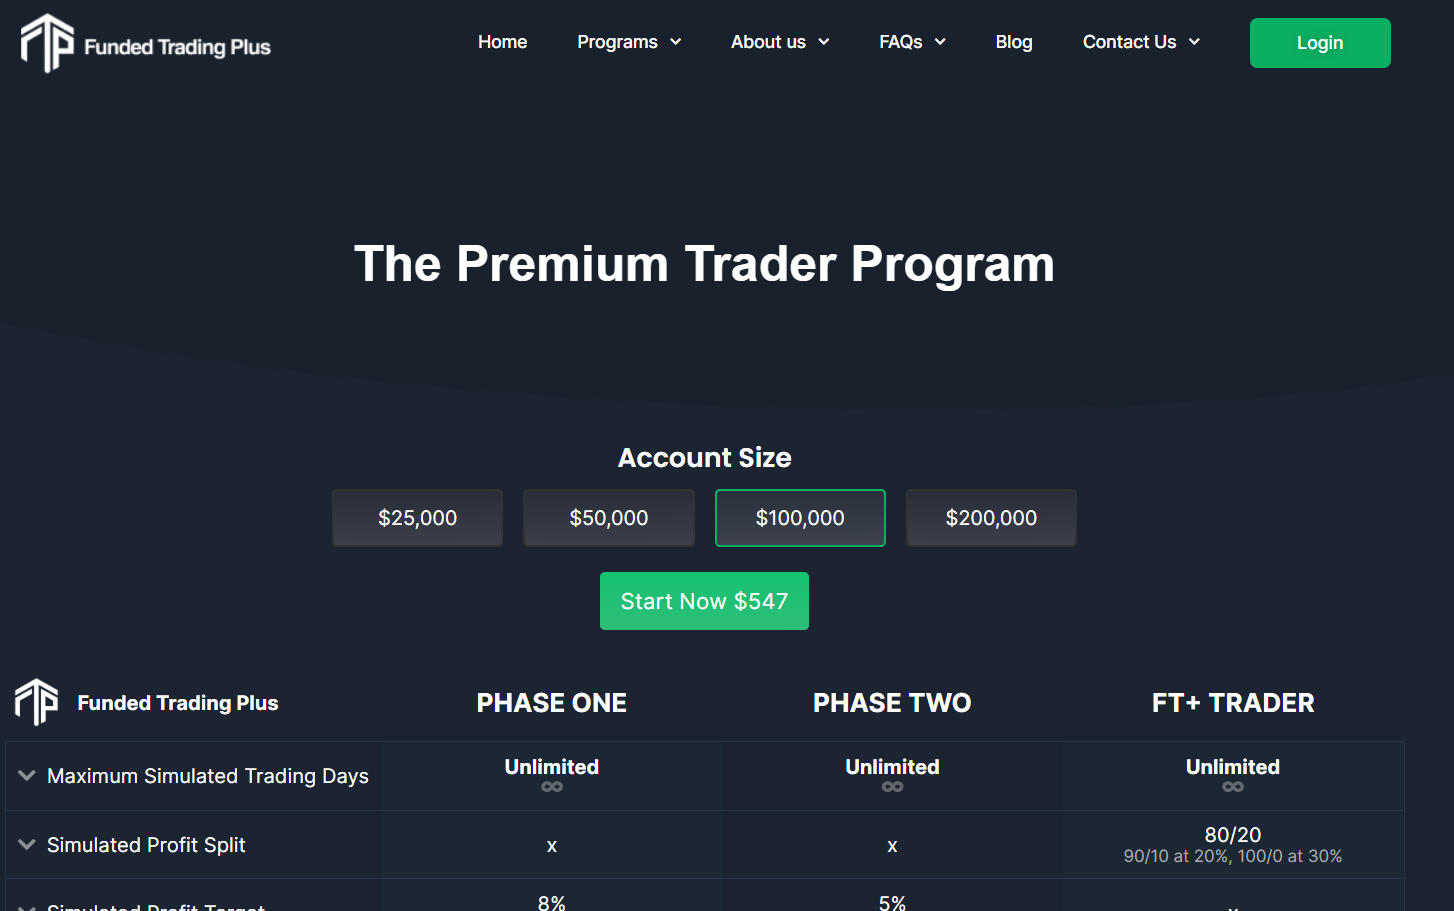 Funded trading plus premium trader program(10% discount code: popa)